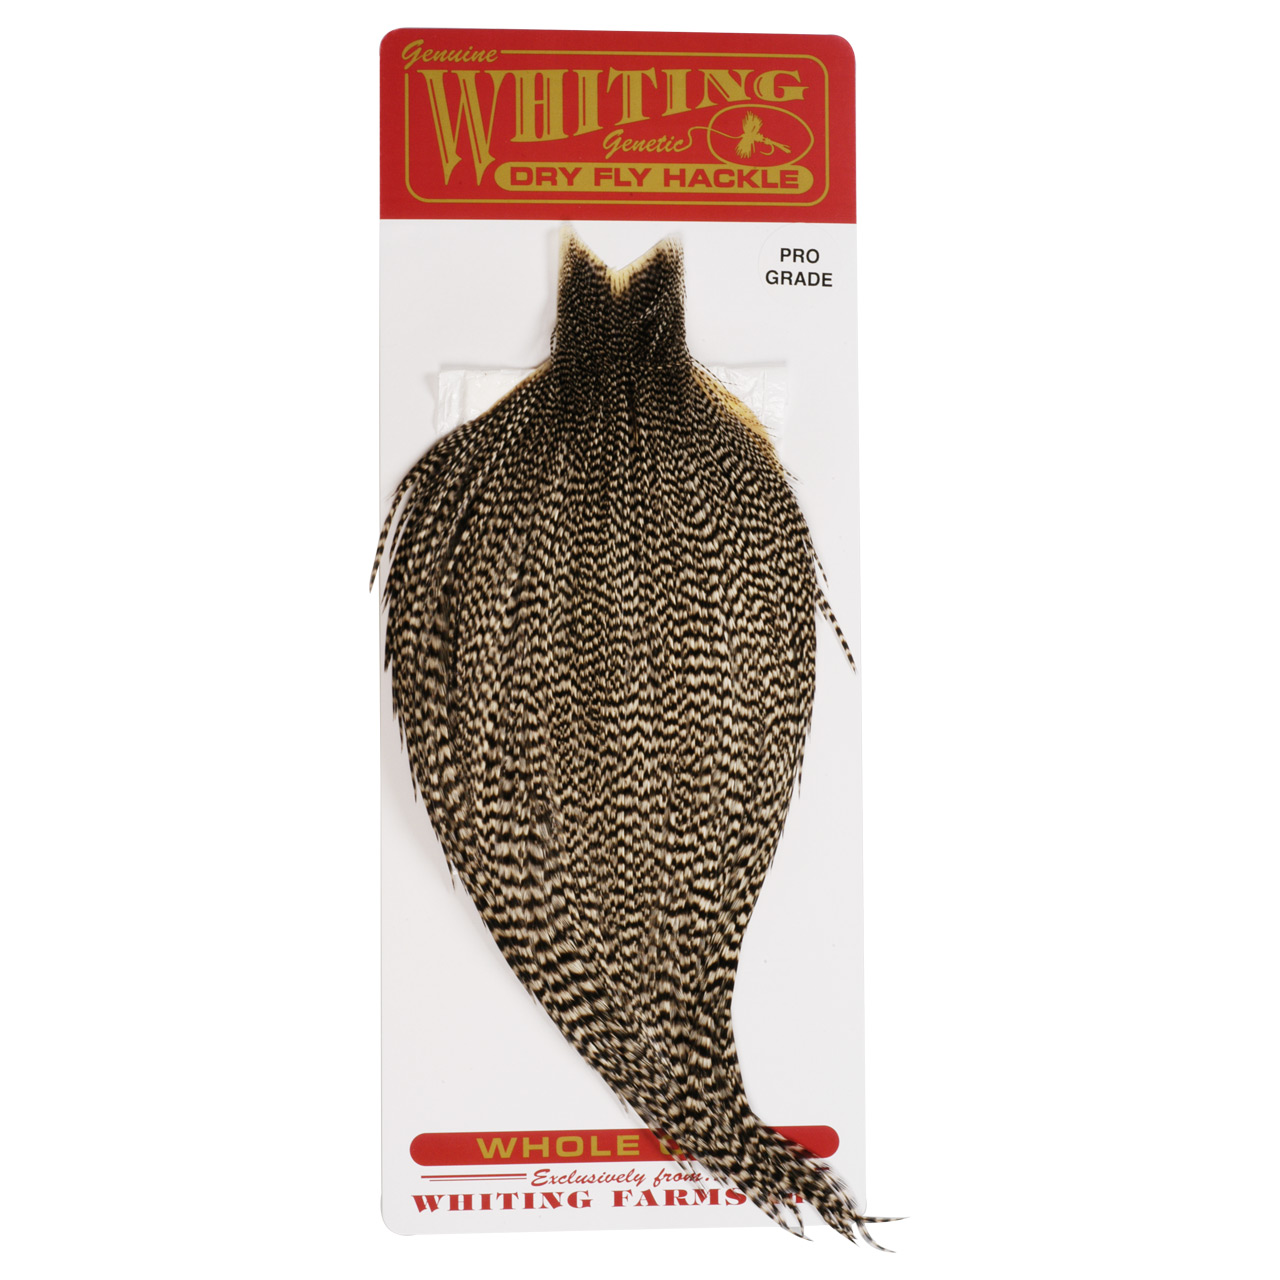 Whiting Farms Pro Grade Grizzly Cape